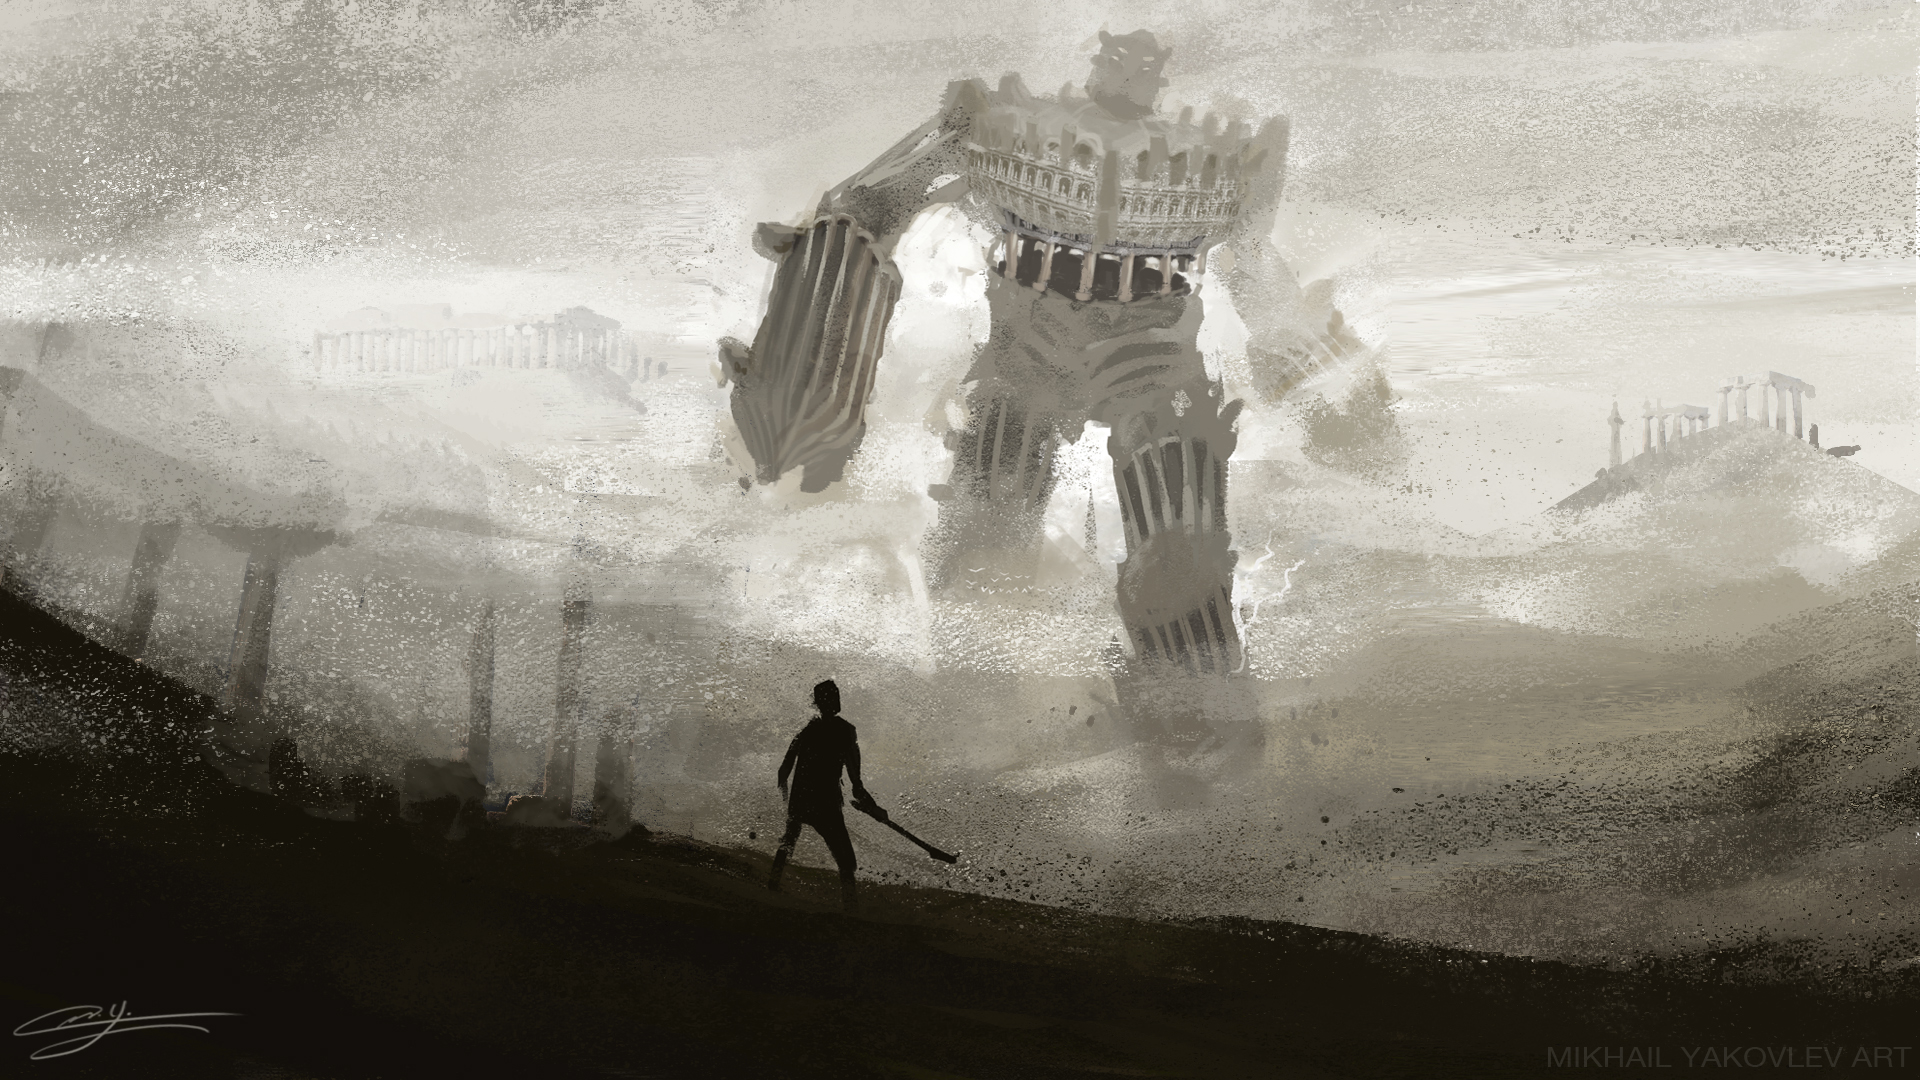 Shadow Of The Colossus Wallpapers